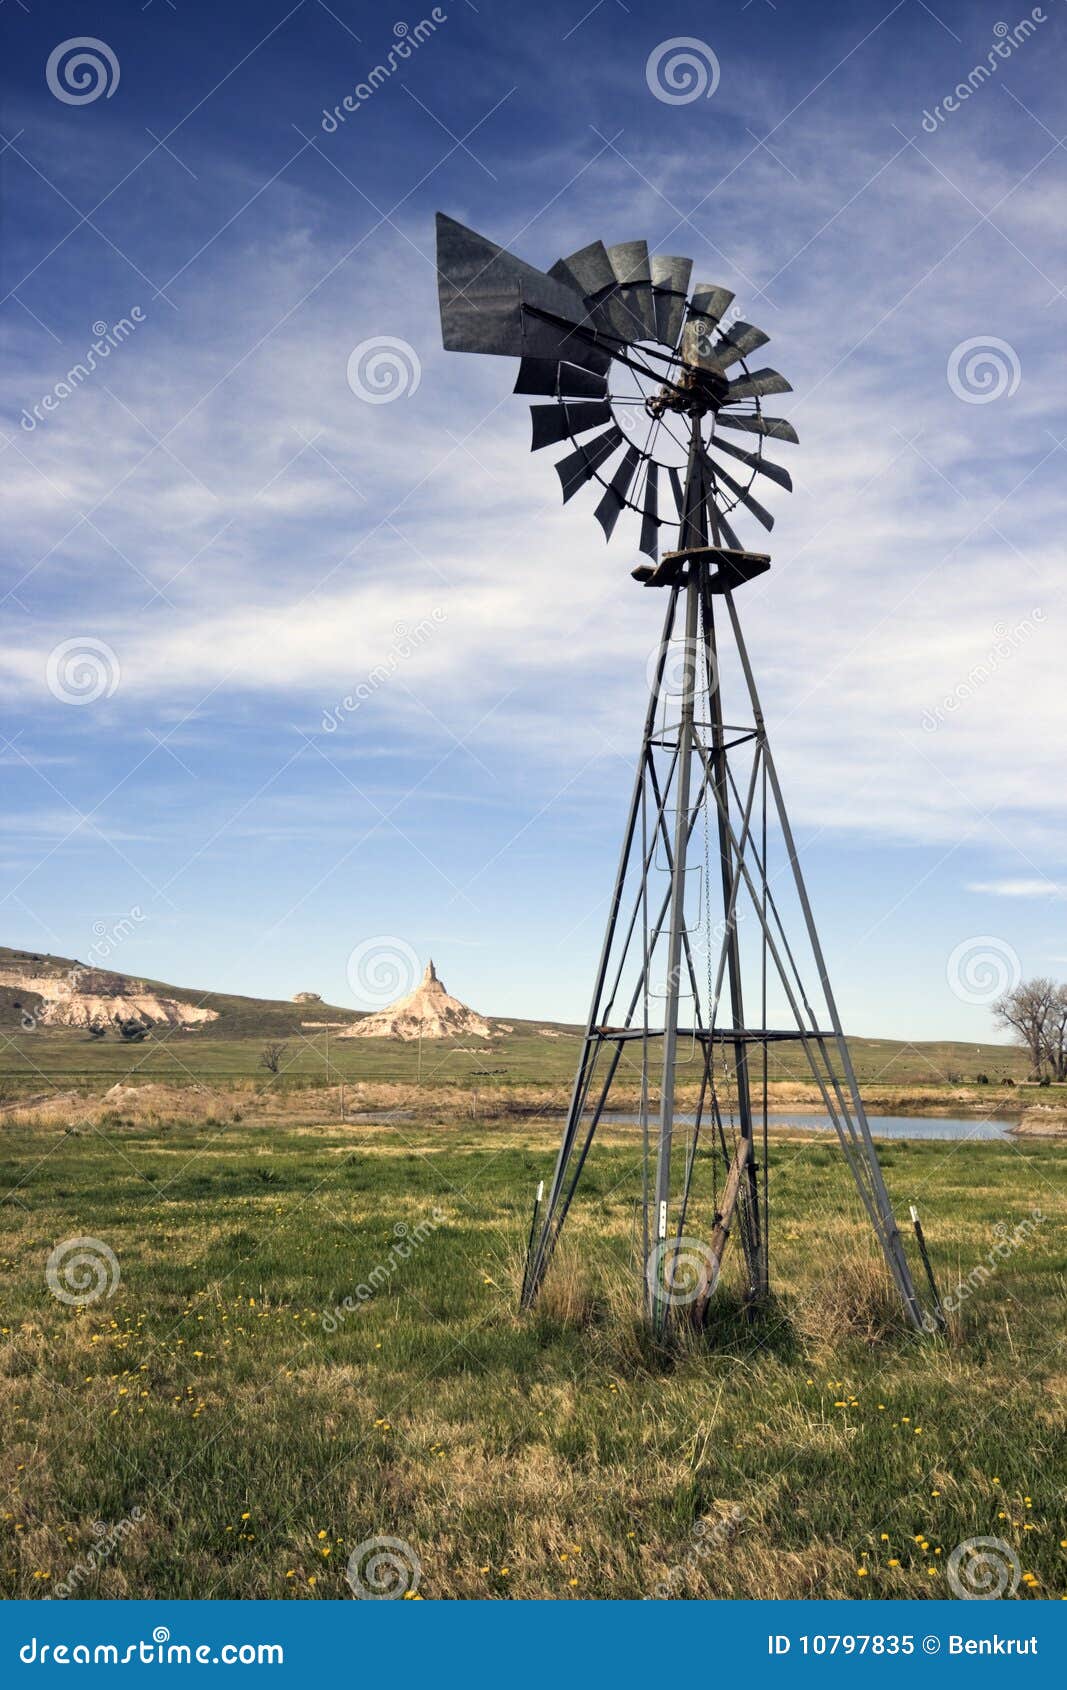 artesian well and chimney rock